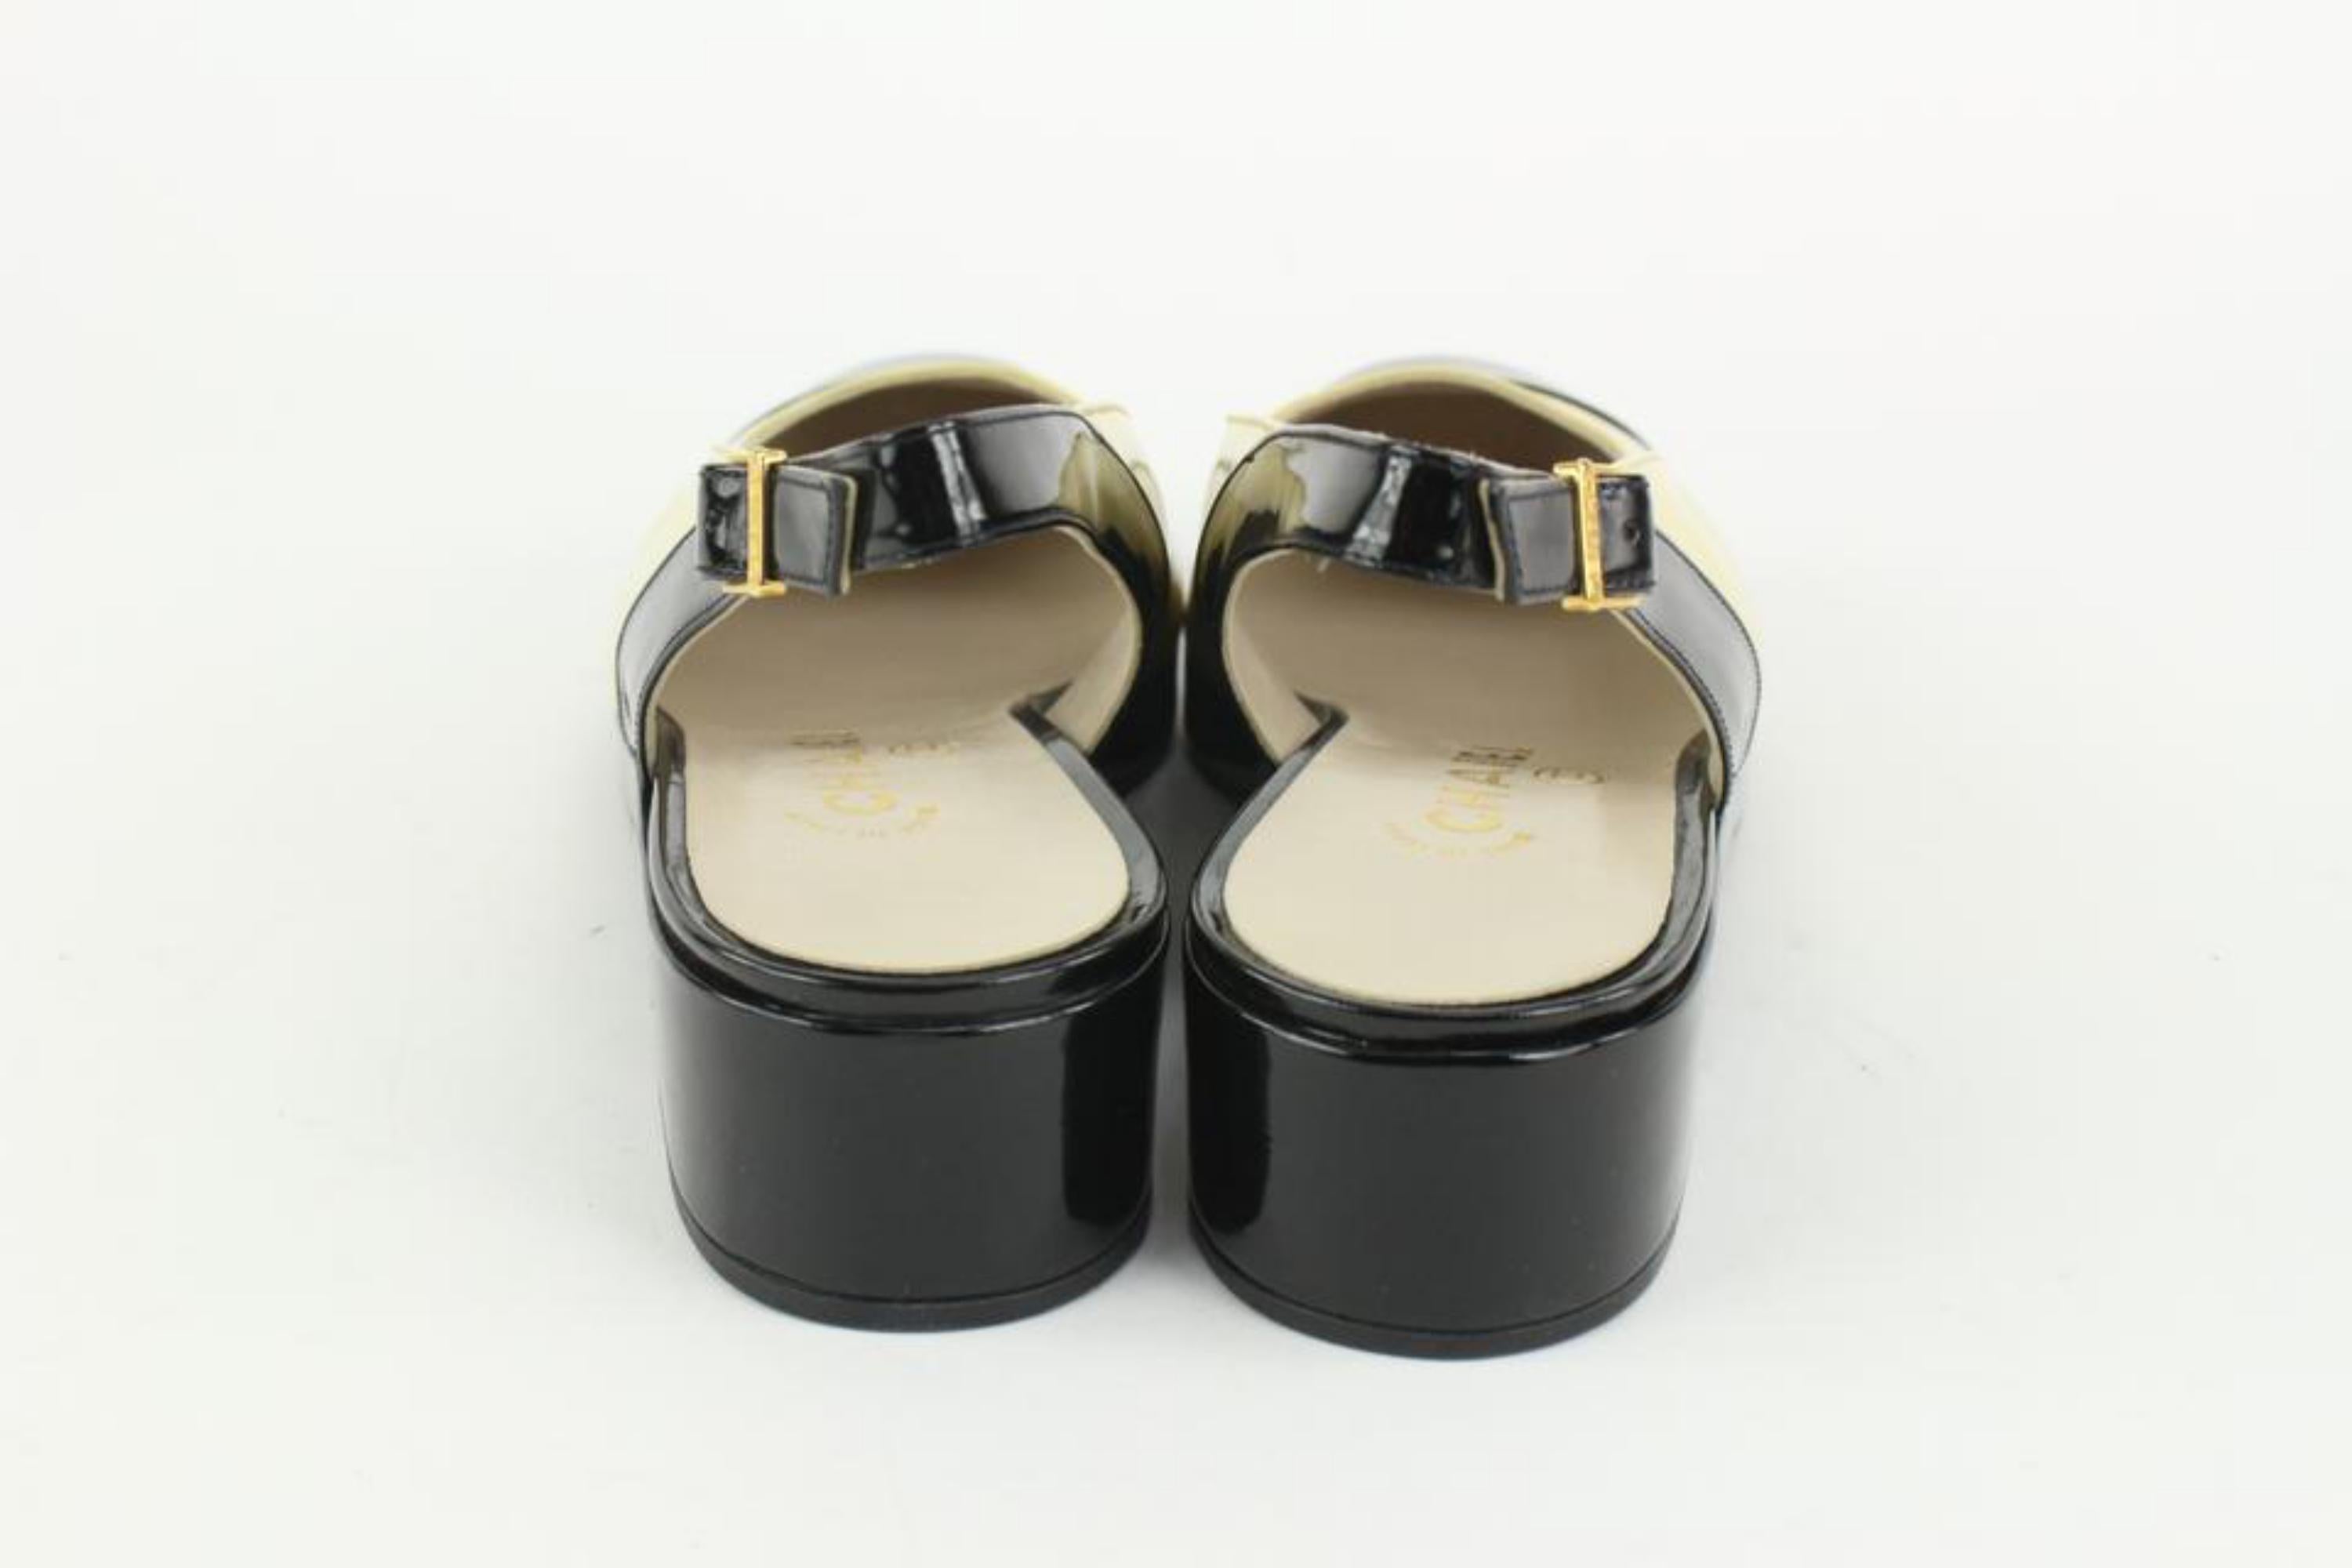 Chanel Ultra Rare 1998 98C New in Box Sz 41 Two Tone Kitten Heels 127c32 For Sale 1